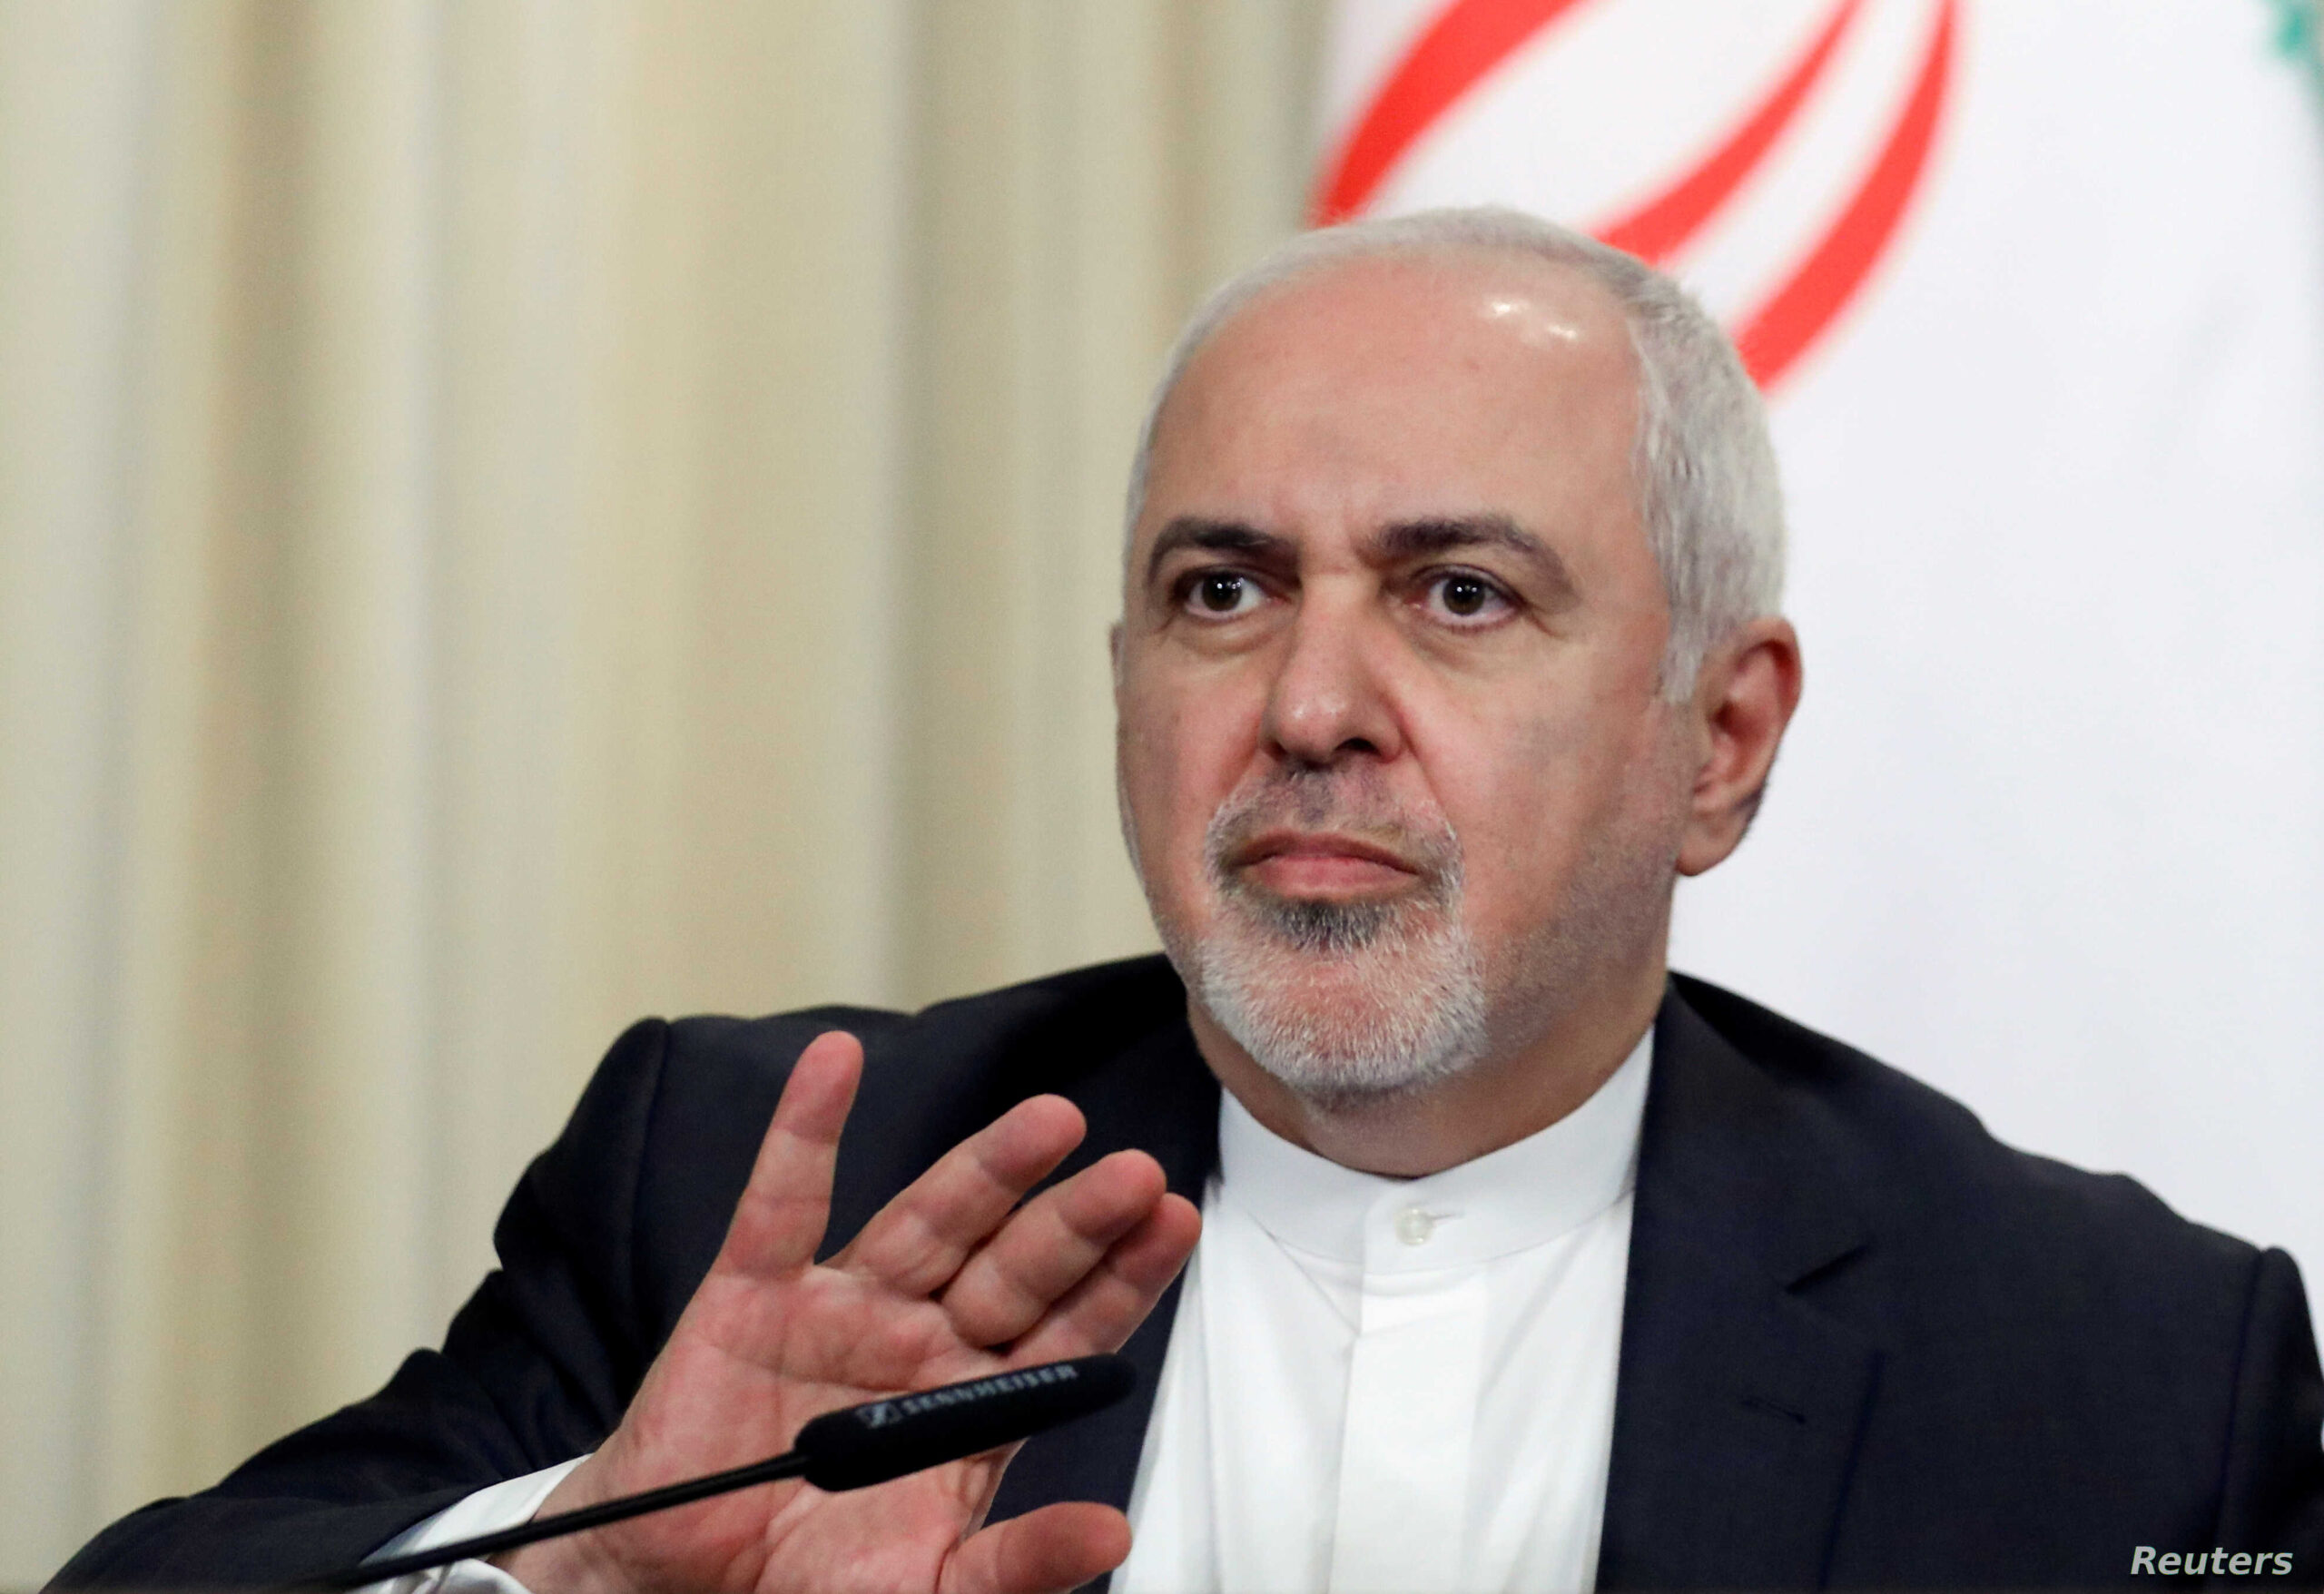 “Internationally recognized borders are our red line”, says Iranian foreign minister